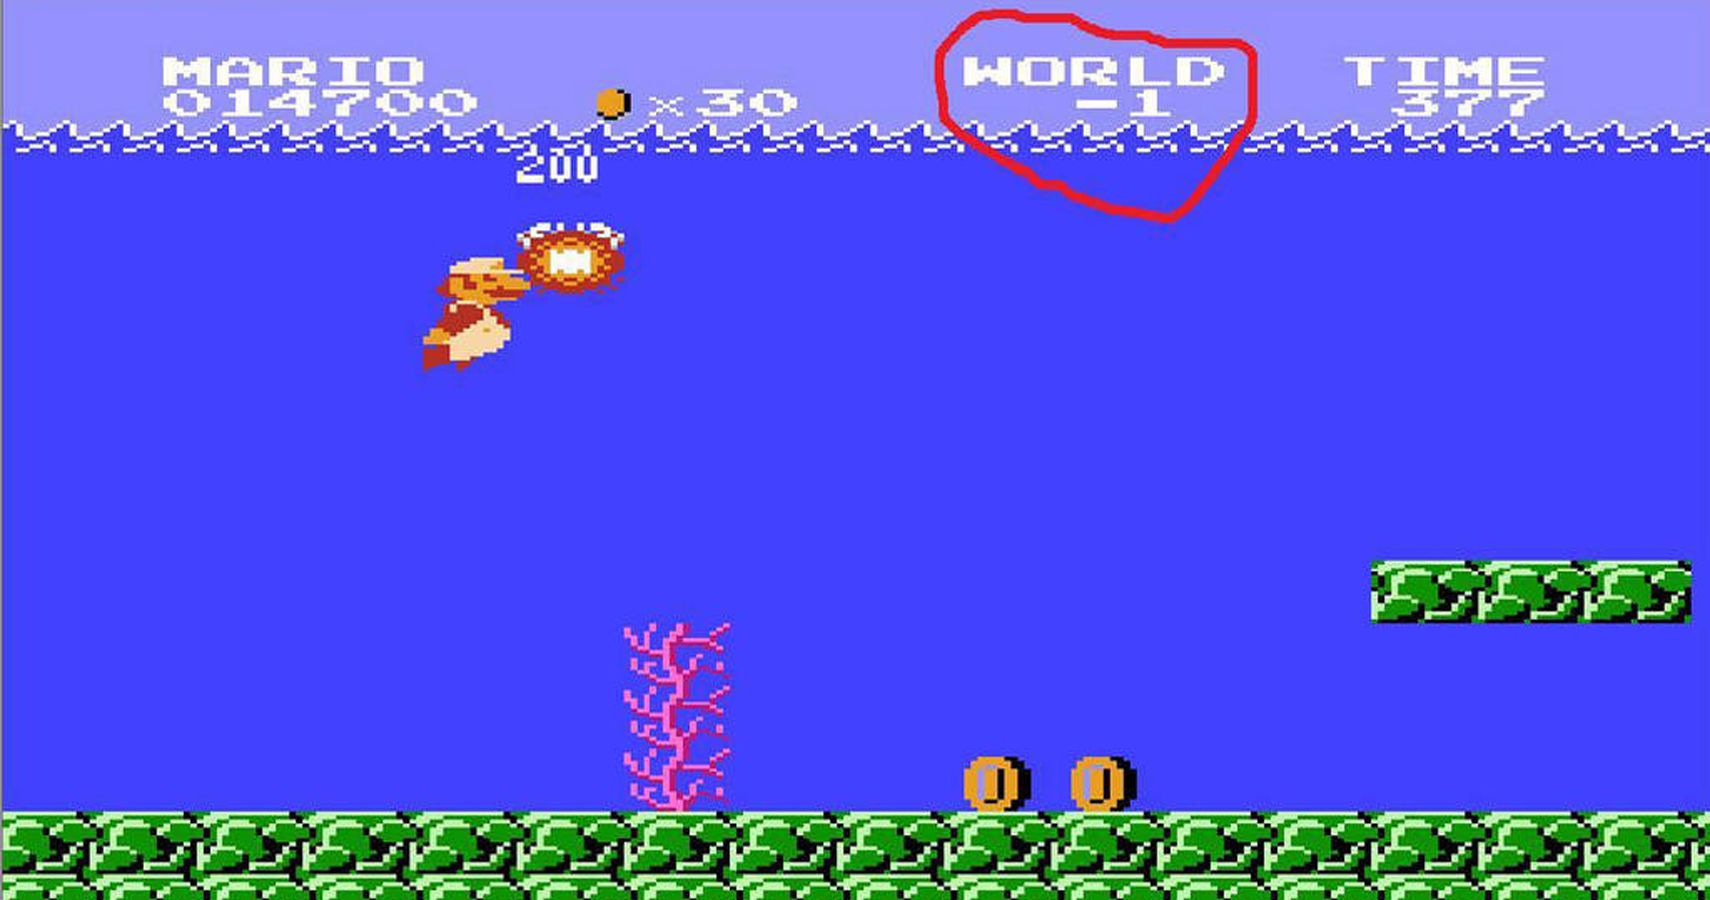 15 Secret Missions In Classic Video Games You Had NO Idea About